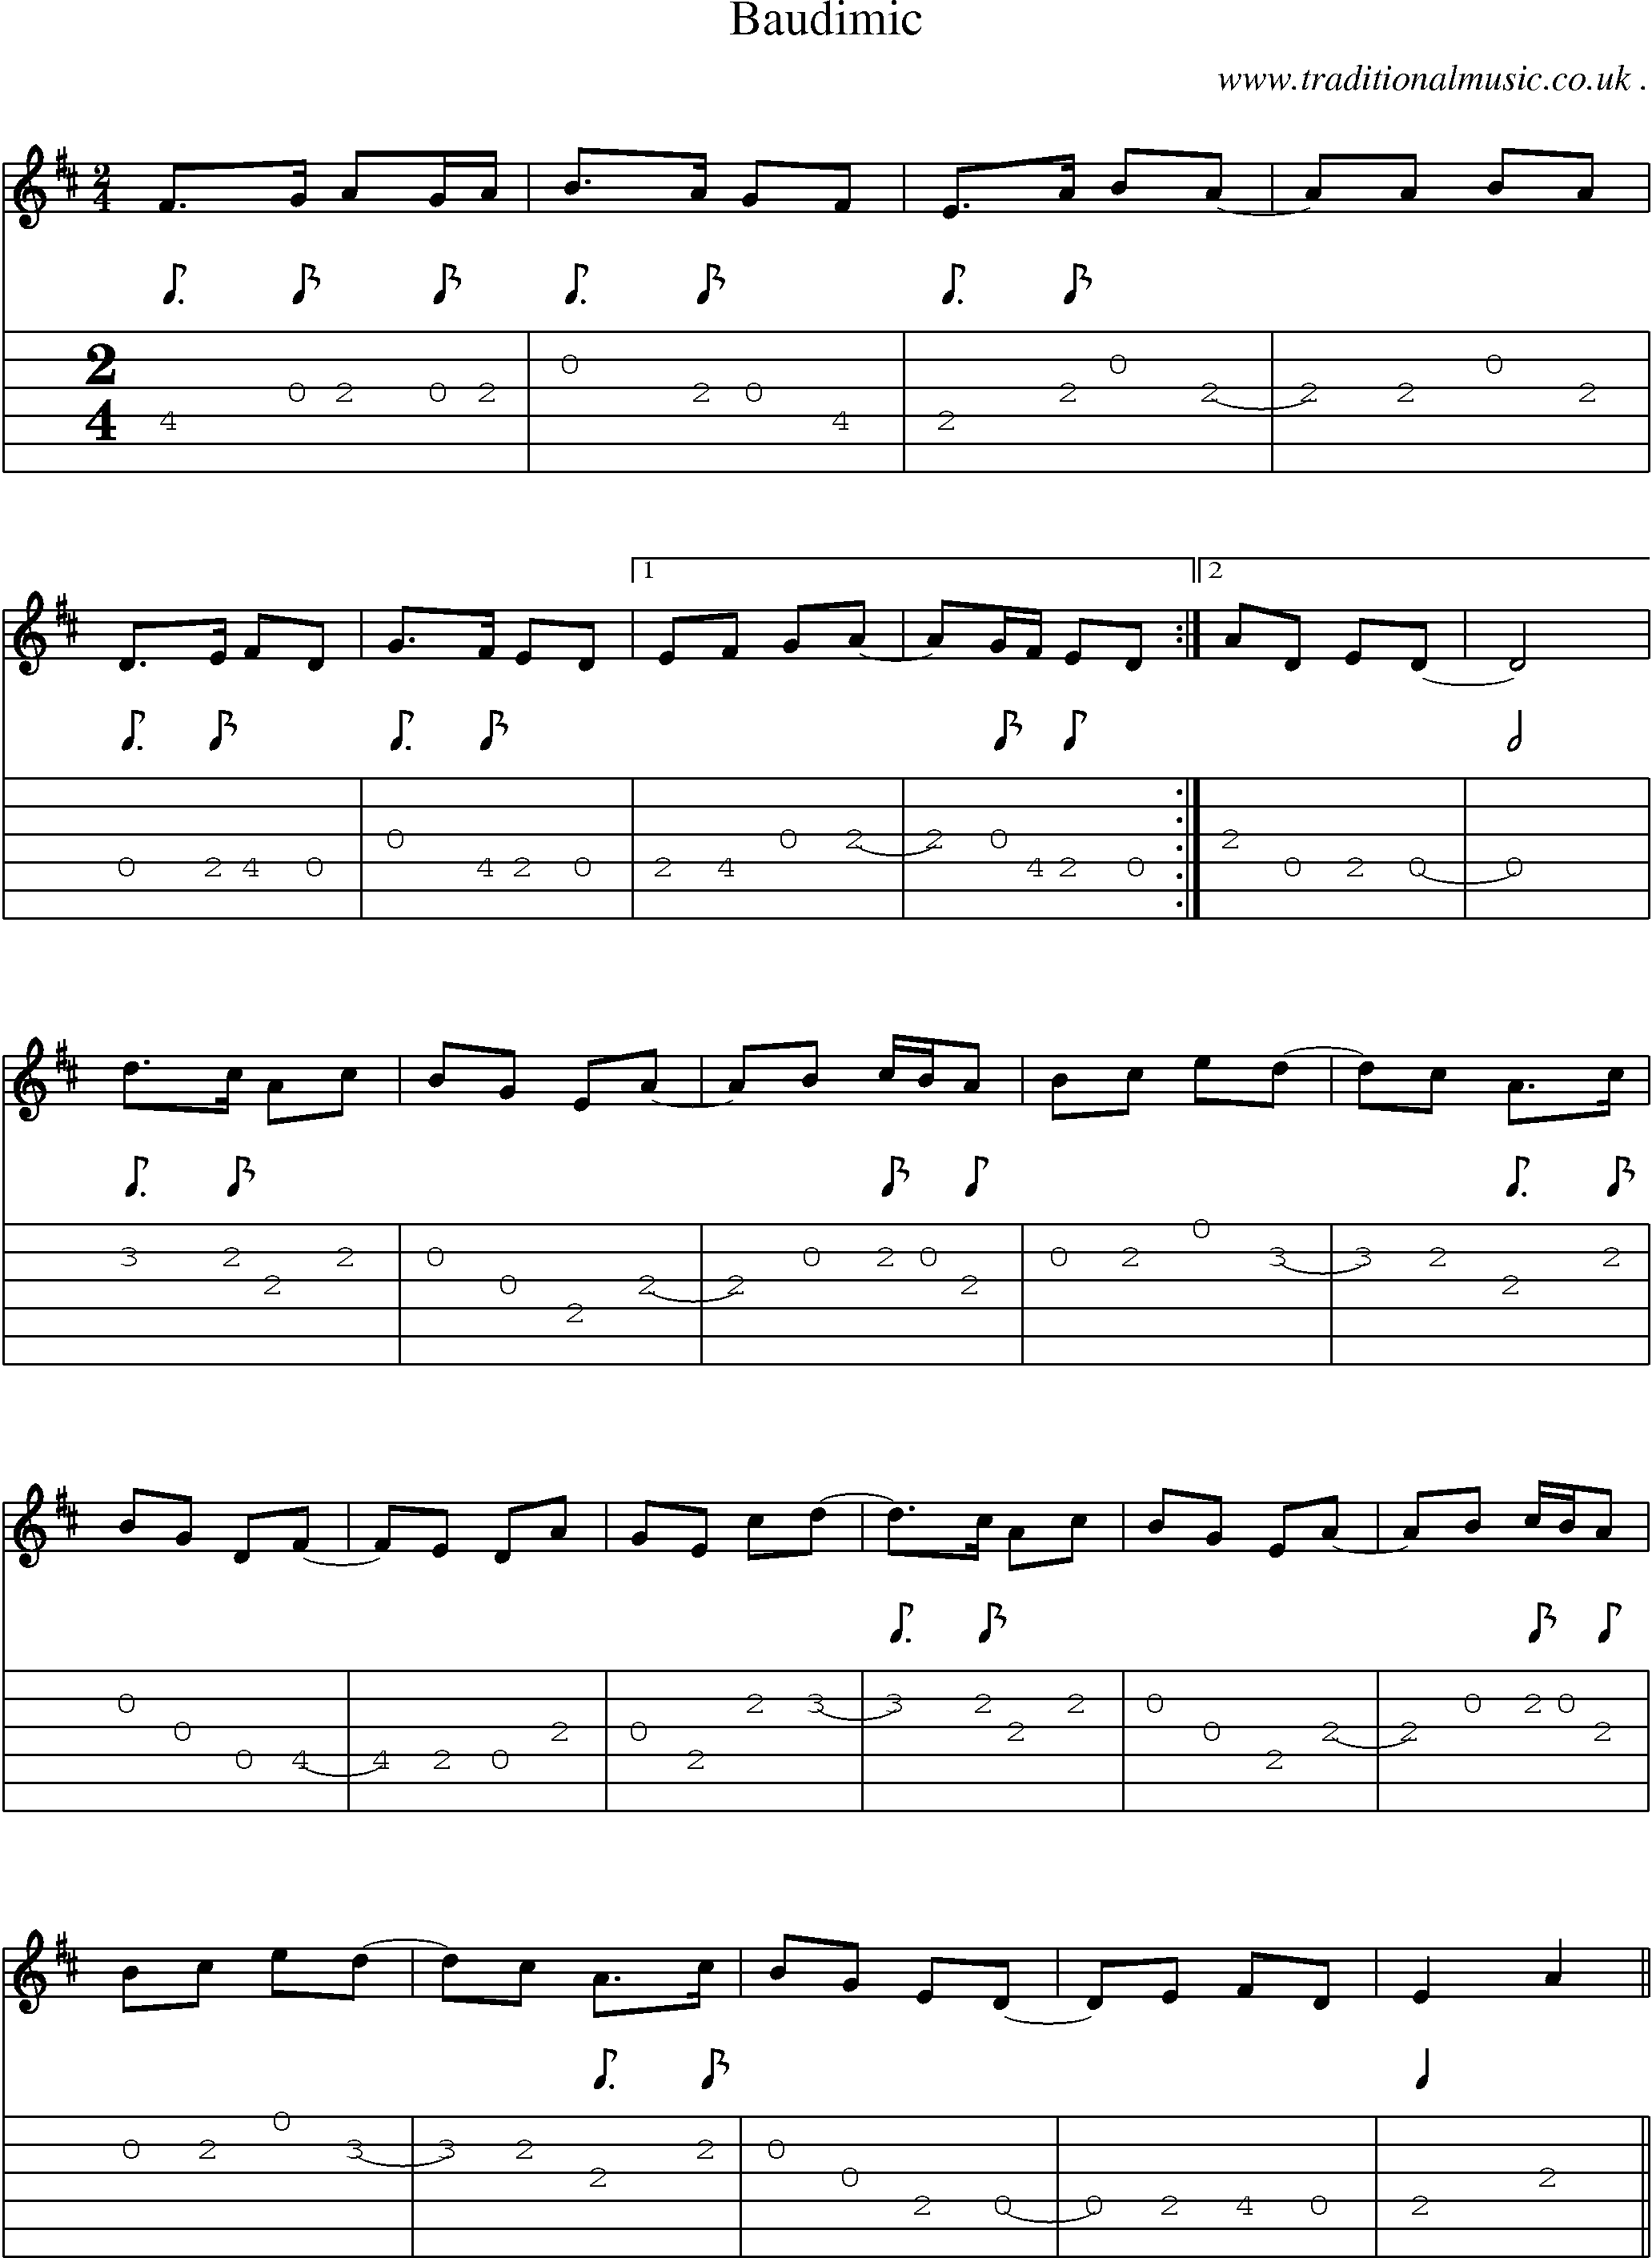 Sheet-Music and Guitar Tabs for Baudimic